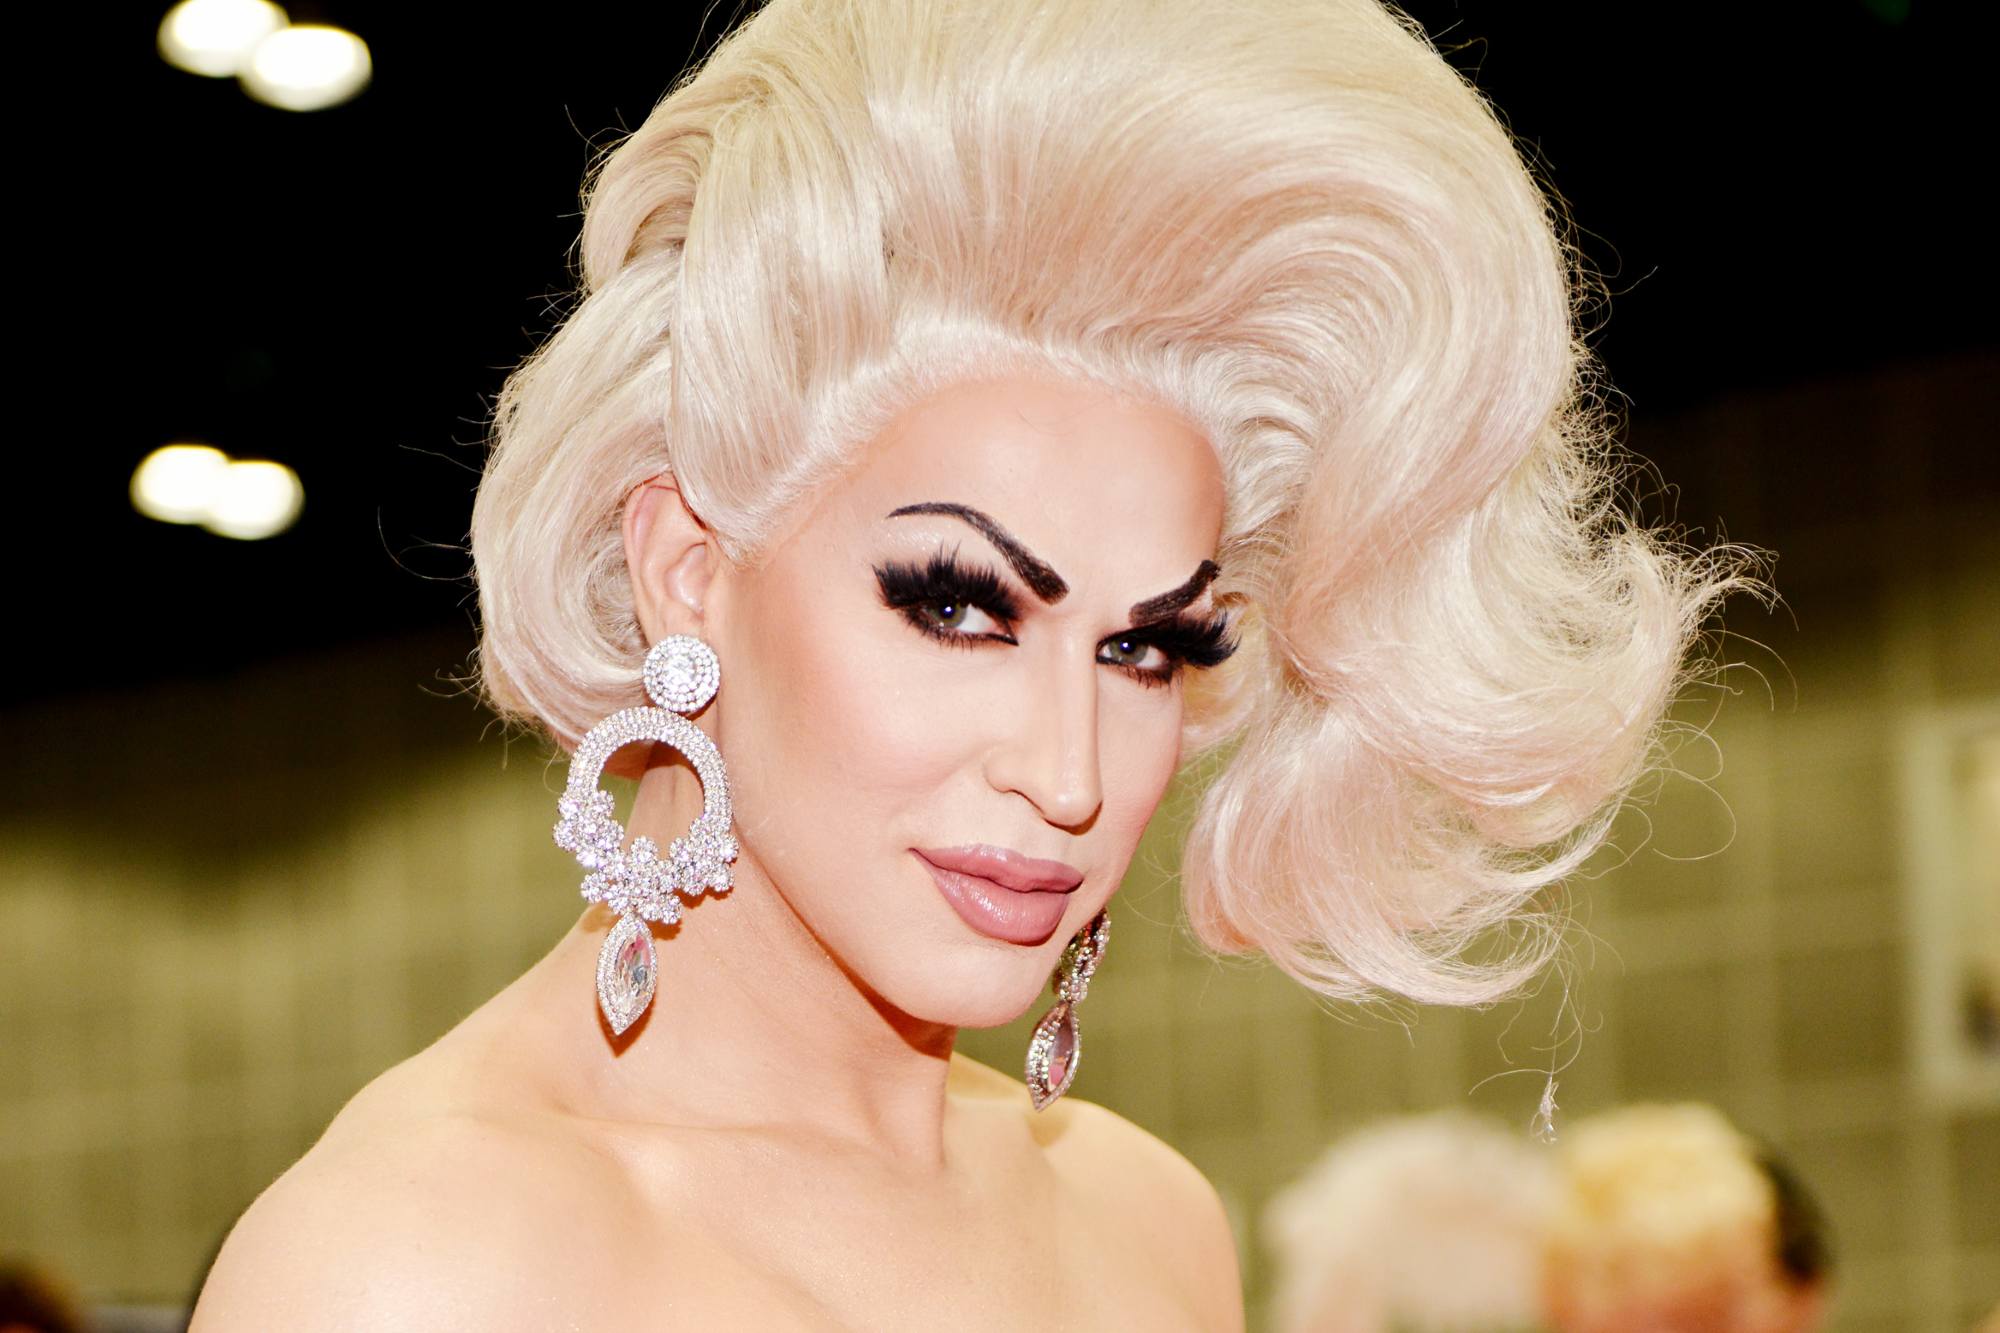 'Canada's Drag Race' Brooke Lynn Hytes with large earrings, looking into the camera